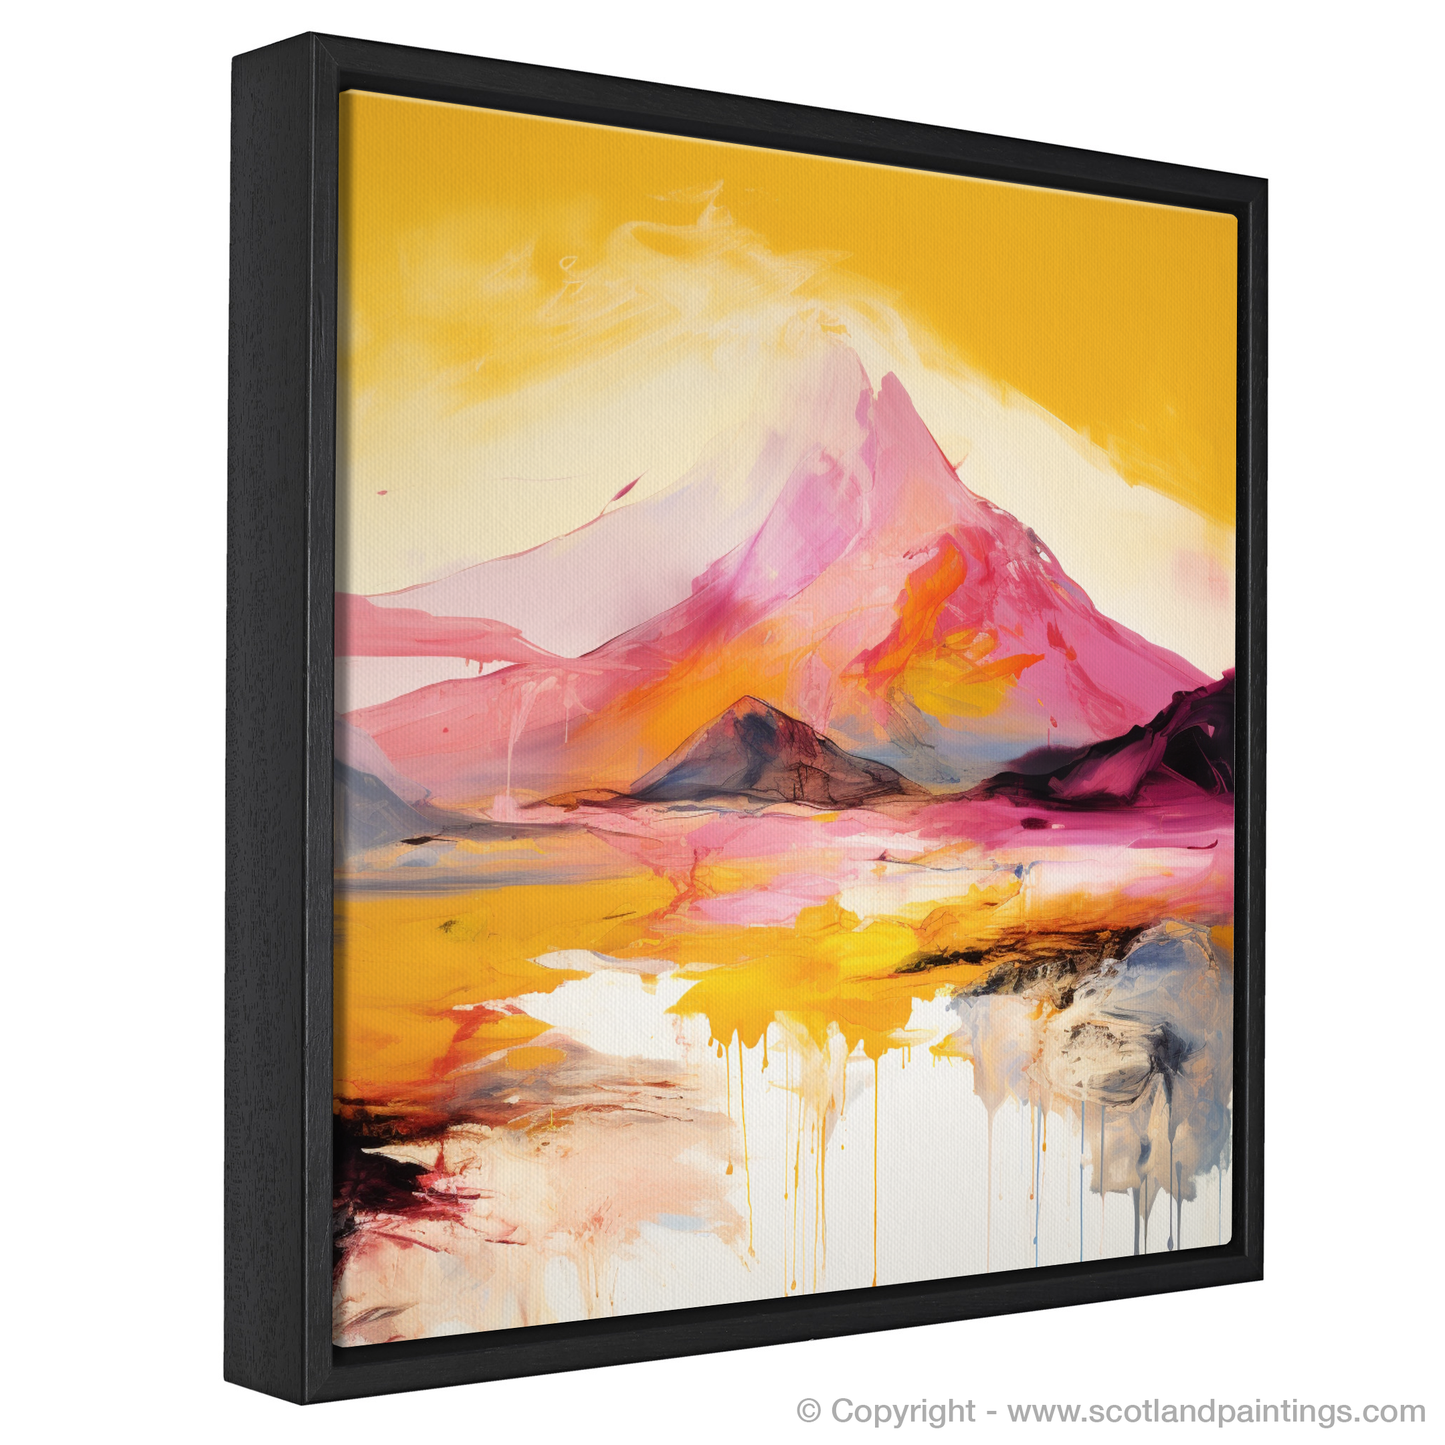 Painting and Art Print of Stob Dearg (Buachaille Etive Mòr) entitled "Explosion of Warmth: An Abstract Ode to Stob Dearg".